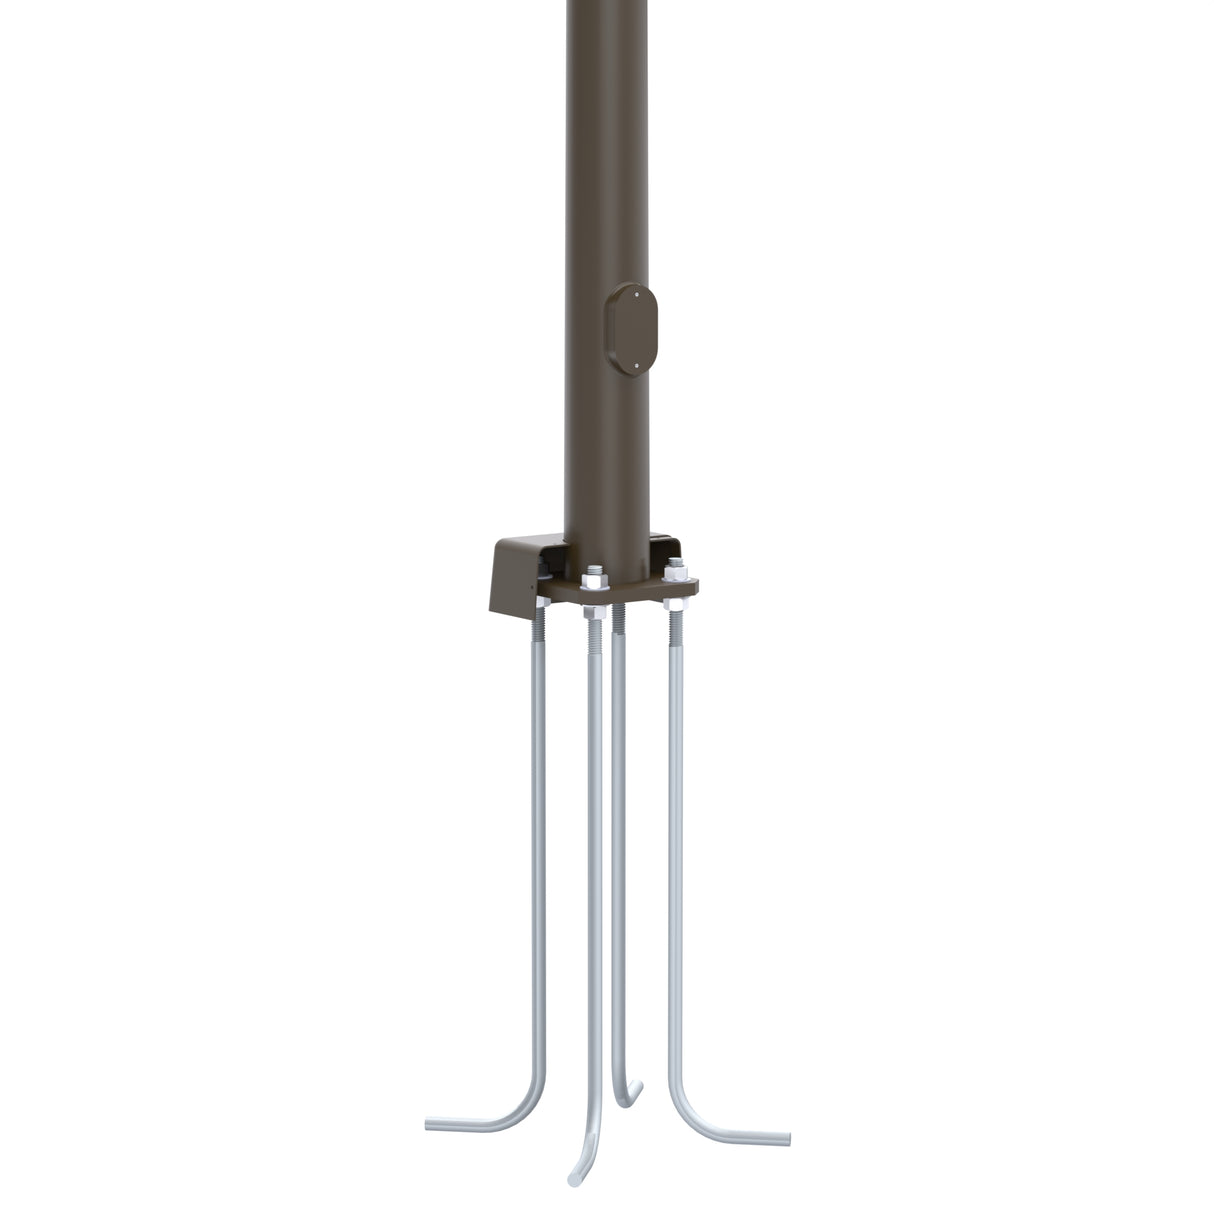 45' Tall x 10" Base OD x 3.7" Top OD x 11ga Thick, Round Tapered Steel, Anchor Base Light Pole